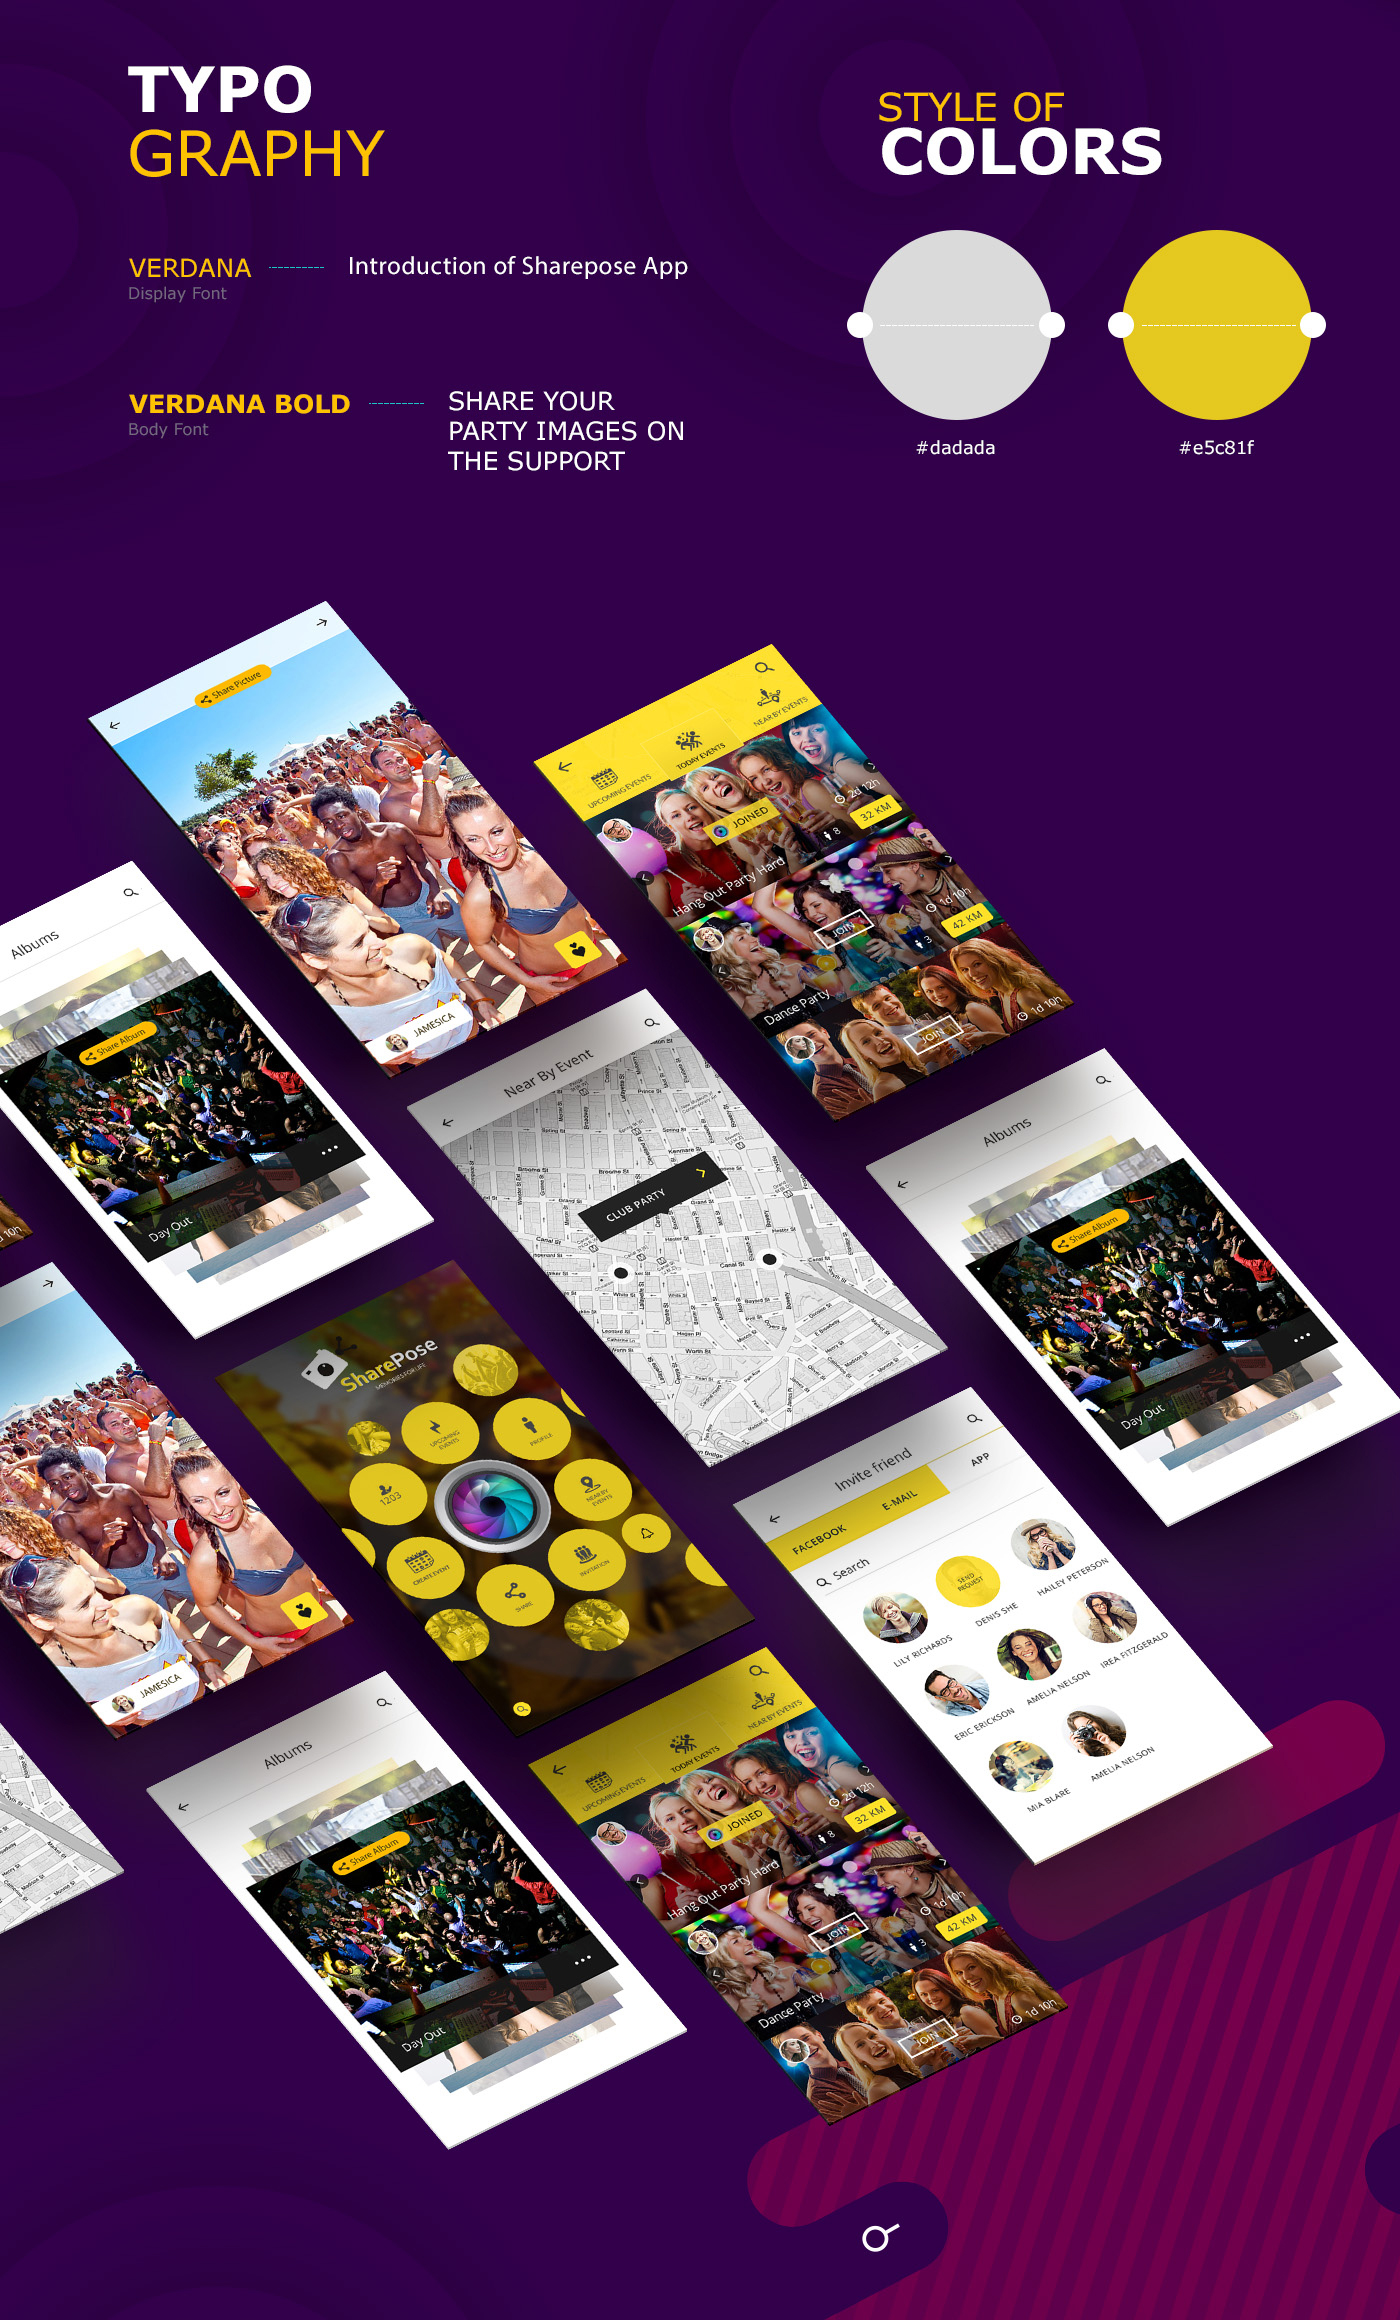 SharePose party Picture sharing Events SharingApp Mobile UI app camera